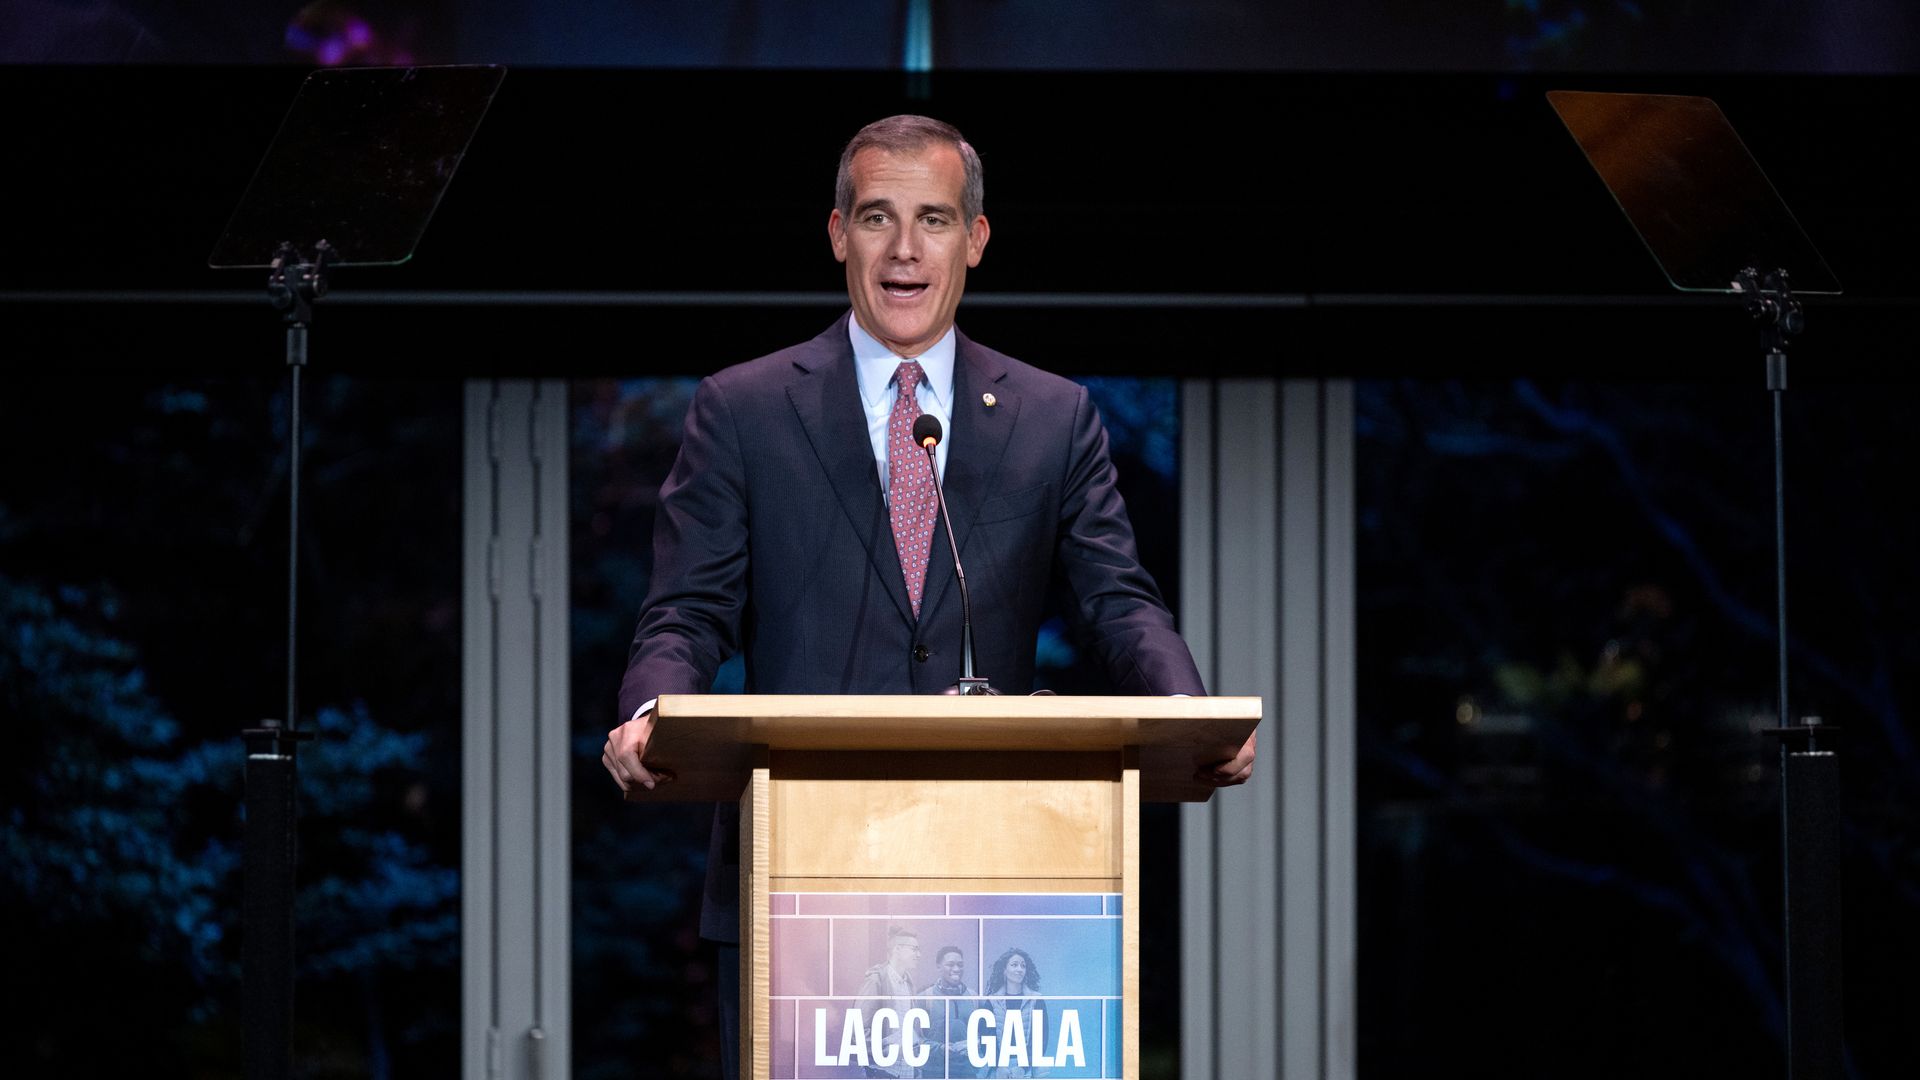 LA Mayor Eric Garcetti attends the 2022 Los Angeles City College Foundation Gala at the Skirball Cultural Center on October 27, 2022 in Los Angeles, California